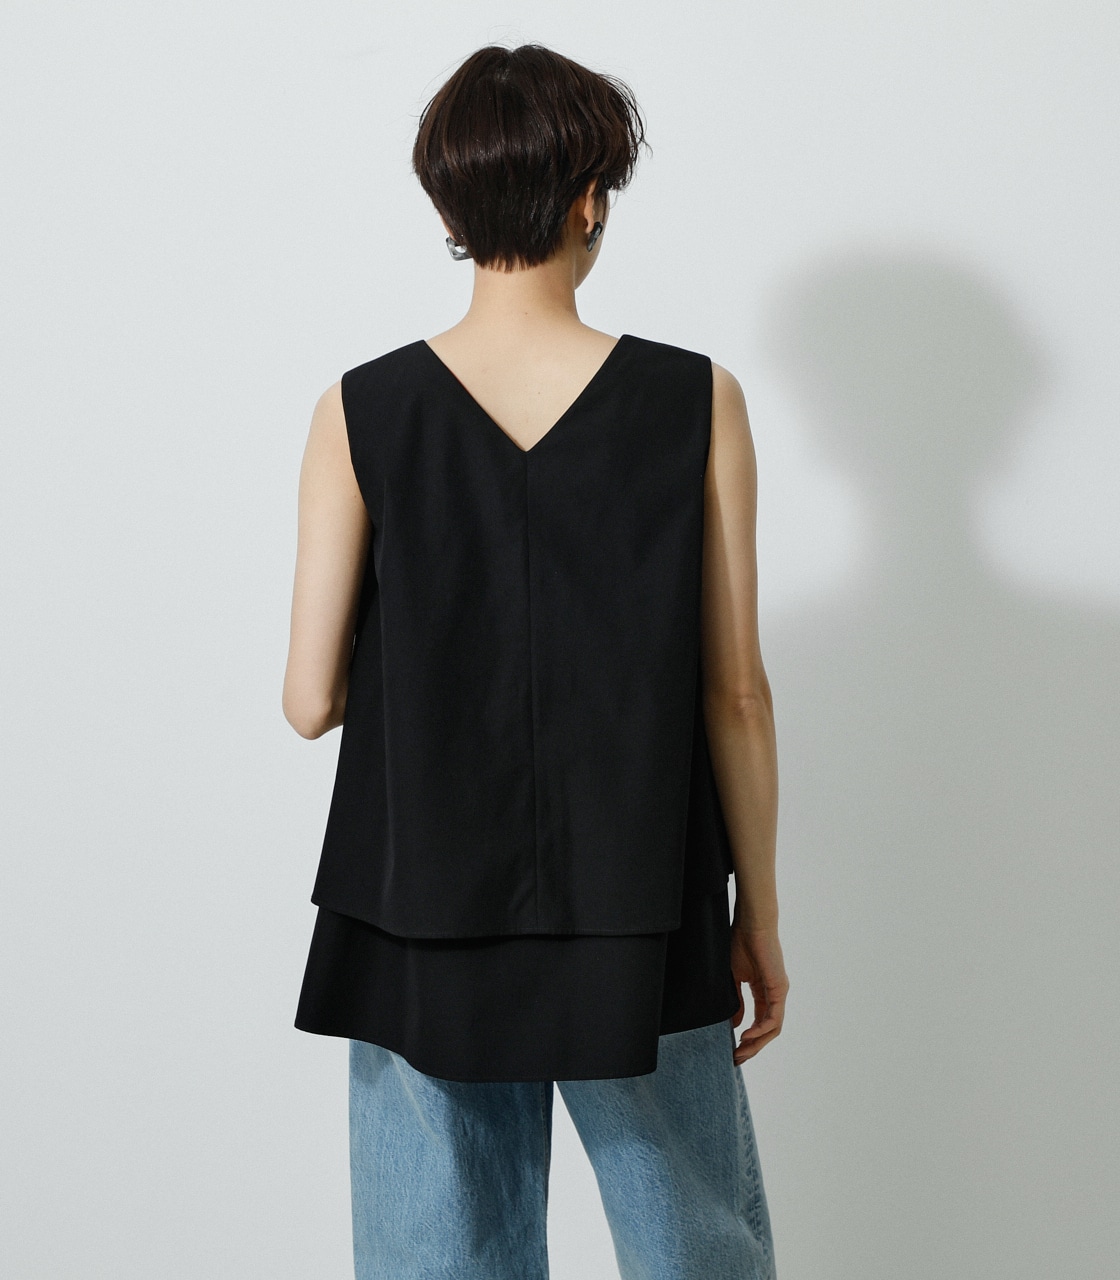 WATER REPELLENT LAYERED TOPS/ウォーターリペレントレイヤードトップス 詳細画像 BLK 7